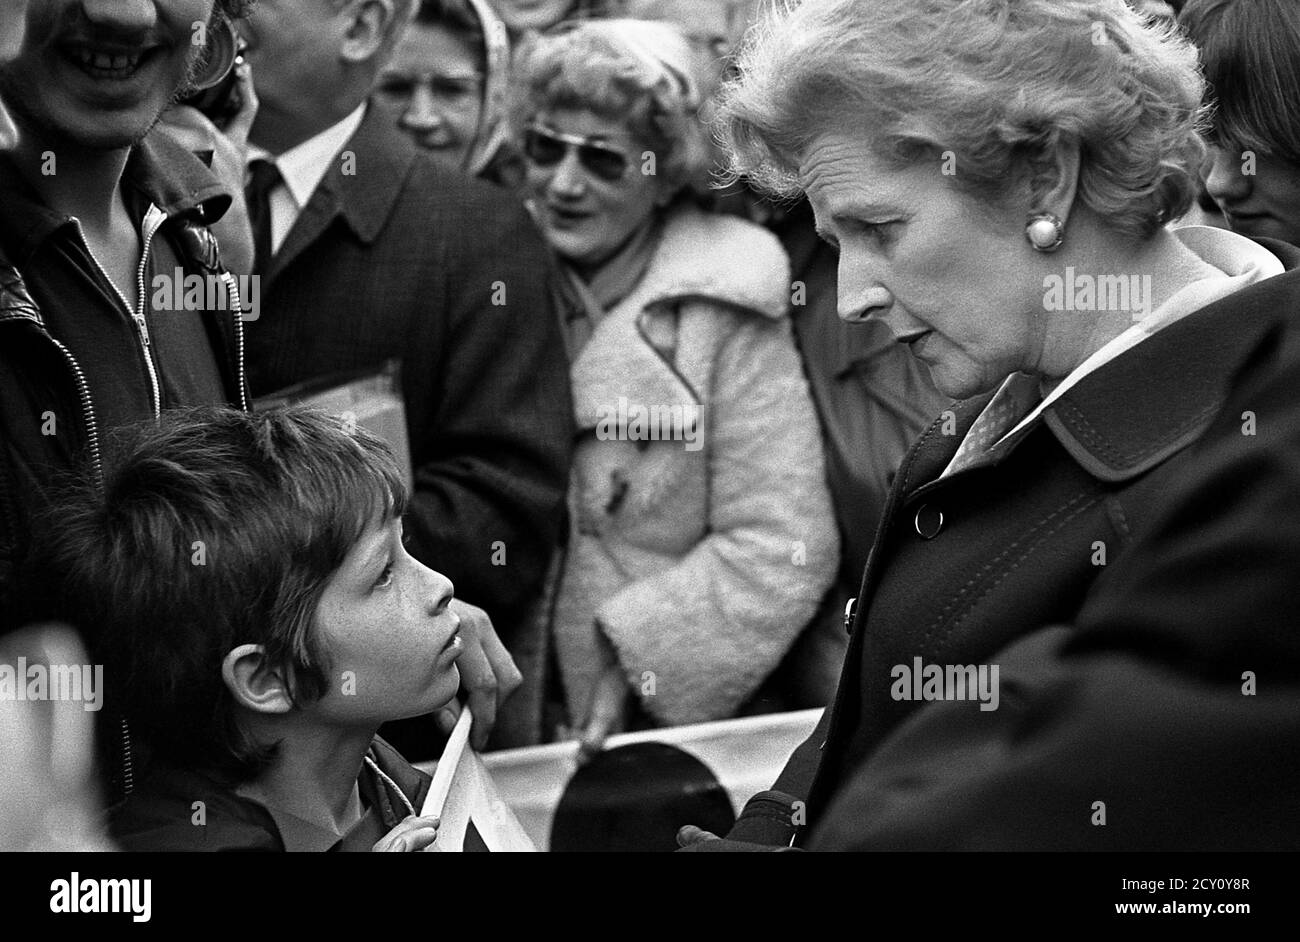 AJAXNETPHOTO.11TH FEBRUARY,1977. PORTSMOUTH, ENGLAND.  - CITY WALKABOUT - MRS MARGARET THATCHER (CON), LEADER OF THE OPPOSITION, CHATS WITH 11 YEAR OLD TONY VENN FOM PORTSEA WHILE MEETING THE PUBLIC IN COMMERCIAL ROAD SHOPPING PRECINCT DURING A CAMPAIGN WALKABOUT. PHOTO:JONATHAN EASTLAND/AJAX REF:3771102 44 Stock Photo